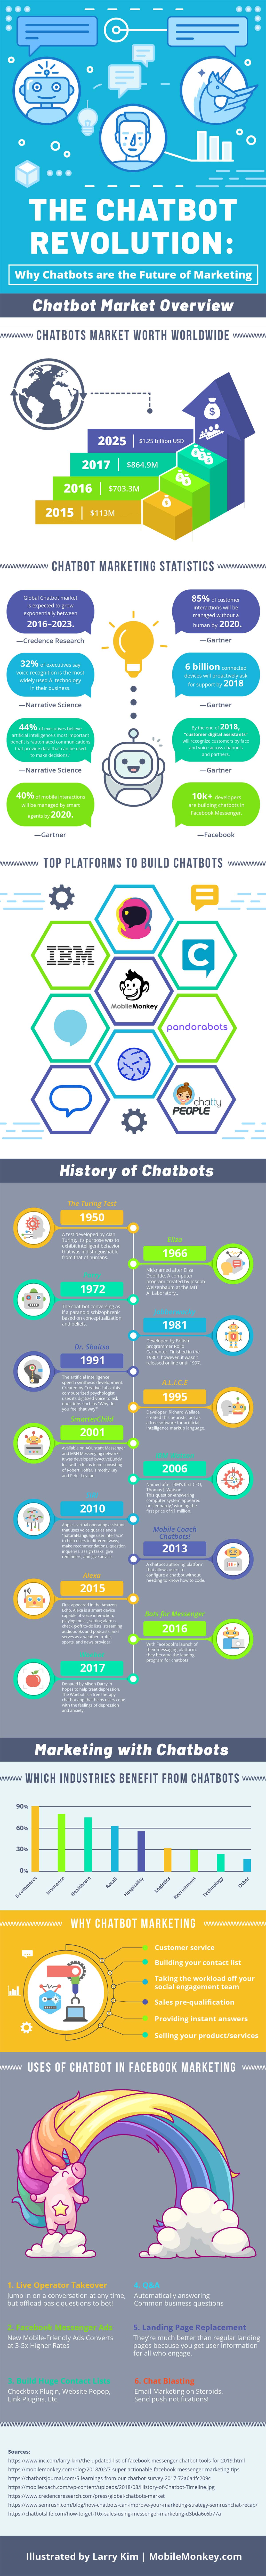 The Chatbot Revolution: Why Chatbots are the Future of Marketing